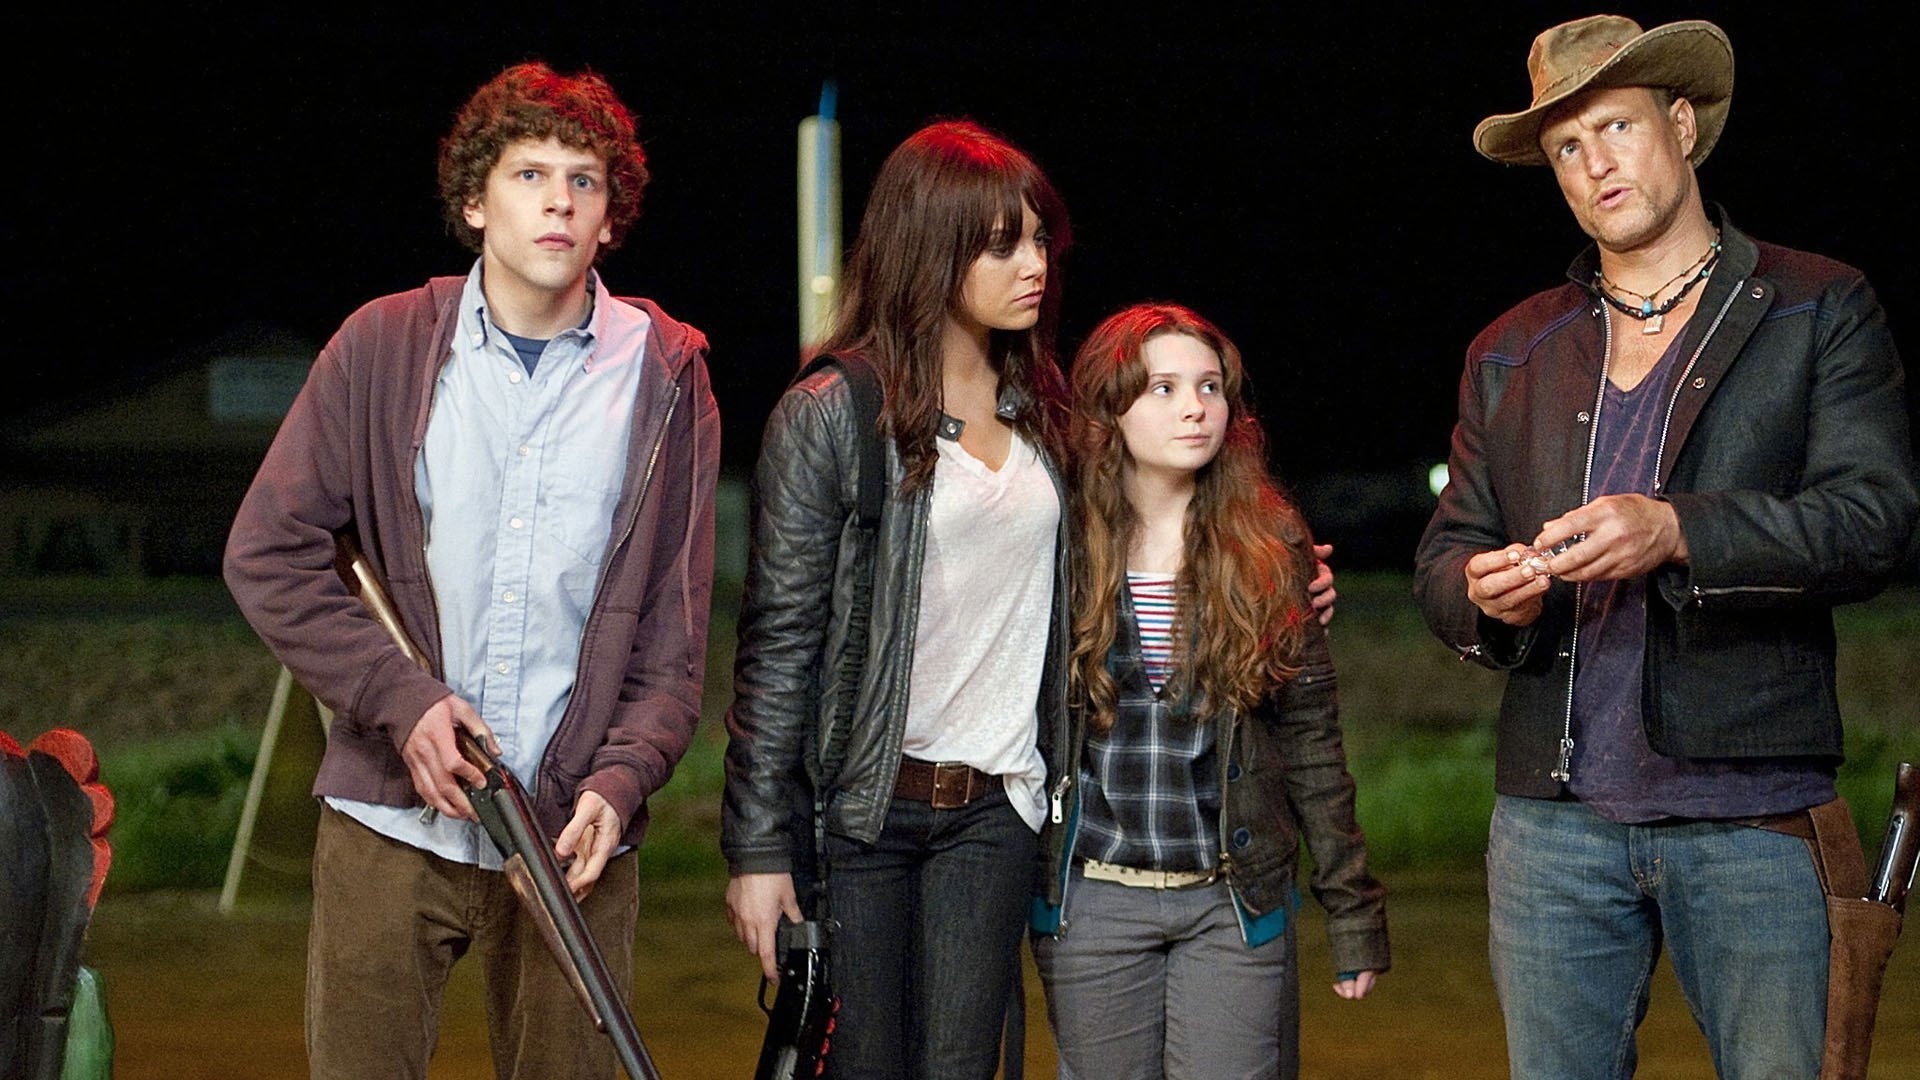 Zombieland: The film was released on 2 October 2009, Woody Harrelson. 1920x1080 Full HD Wallpaper.